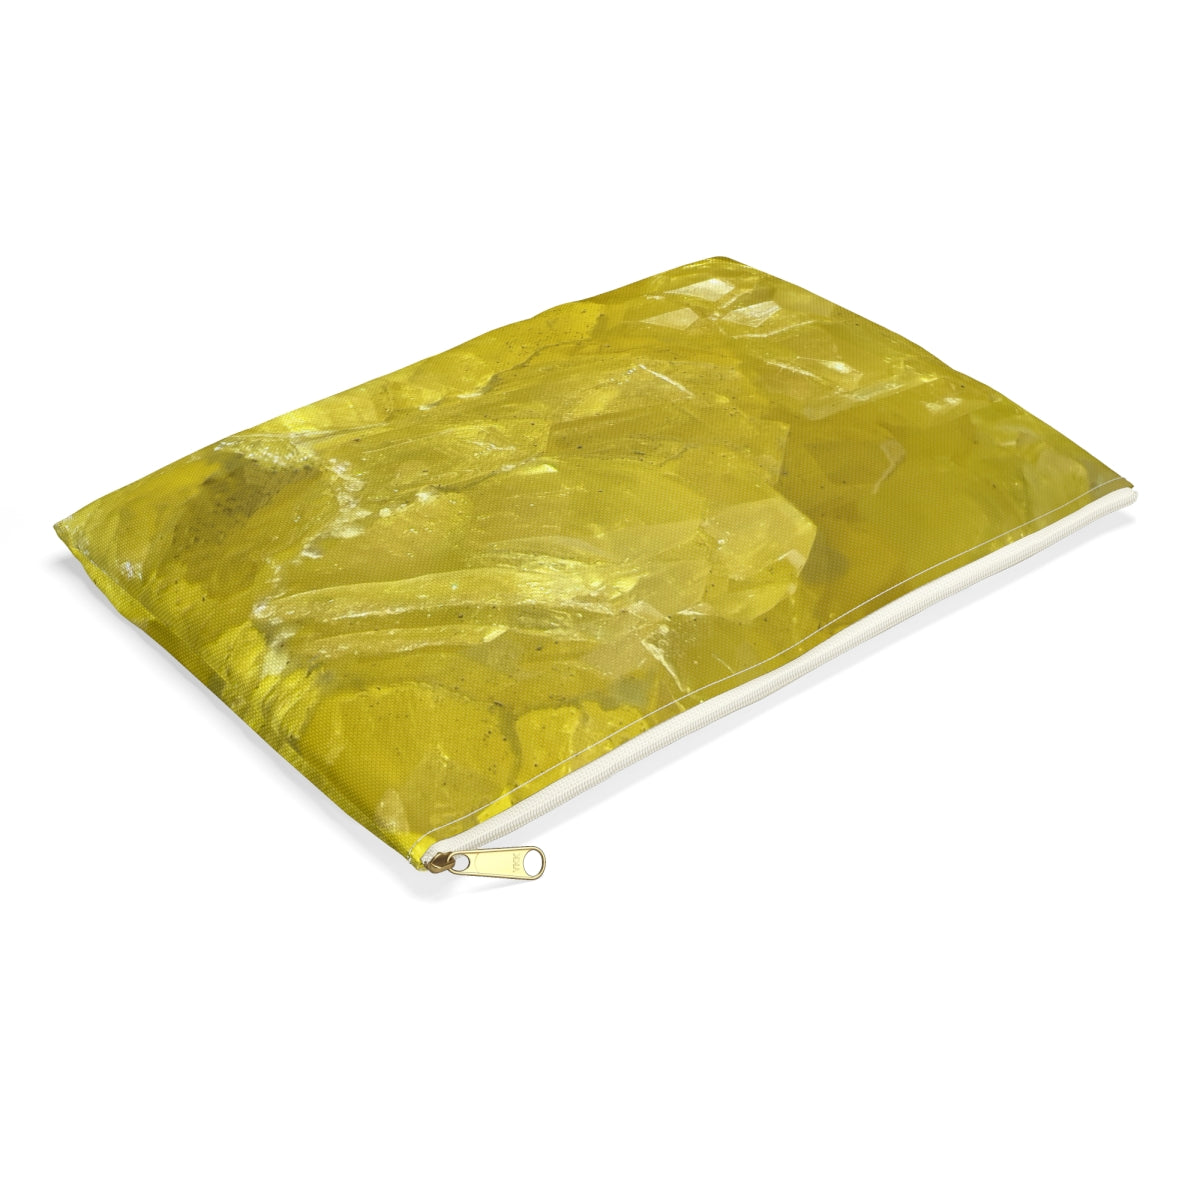 Sulfur Crystal Accessory Pouch